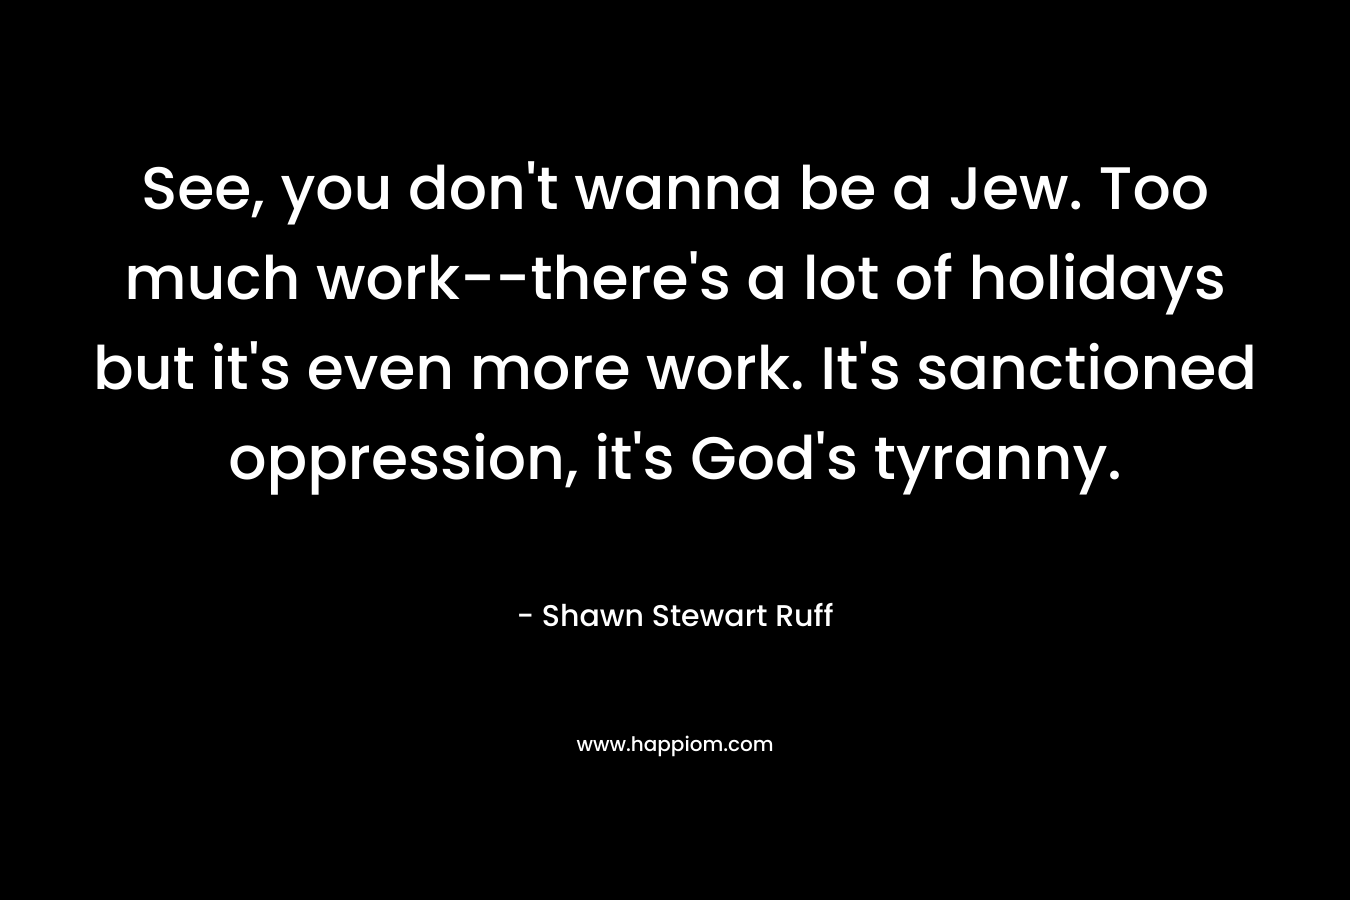 See, you don’t wanna be a Jew. Too much work–there’s a lot of holidays but it’s even more work. It’s sanctioned oppression, it’s God’s tyranny. – Shawn Stewart Ruff